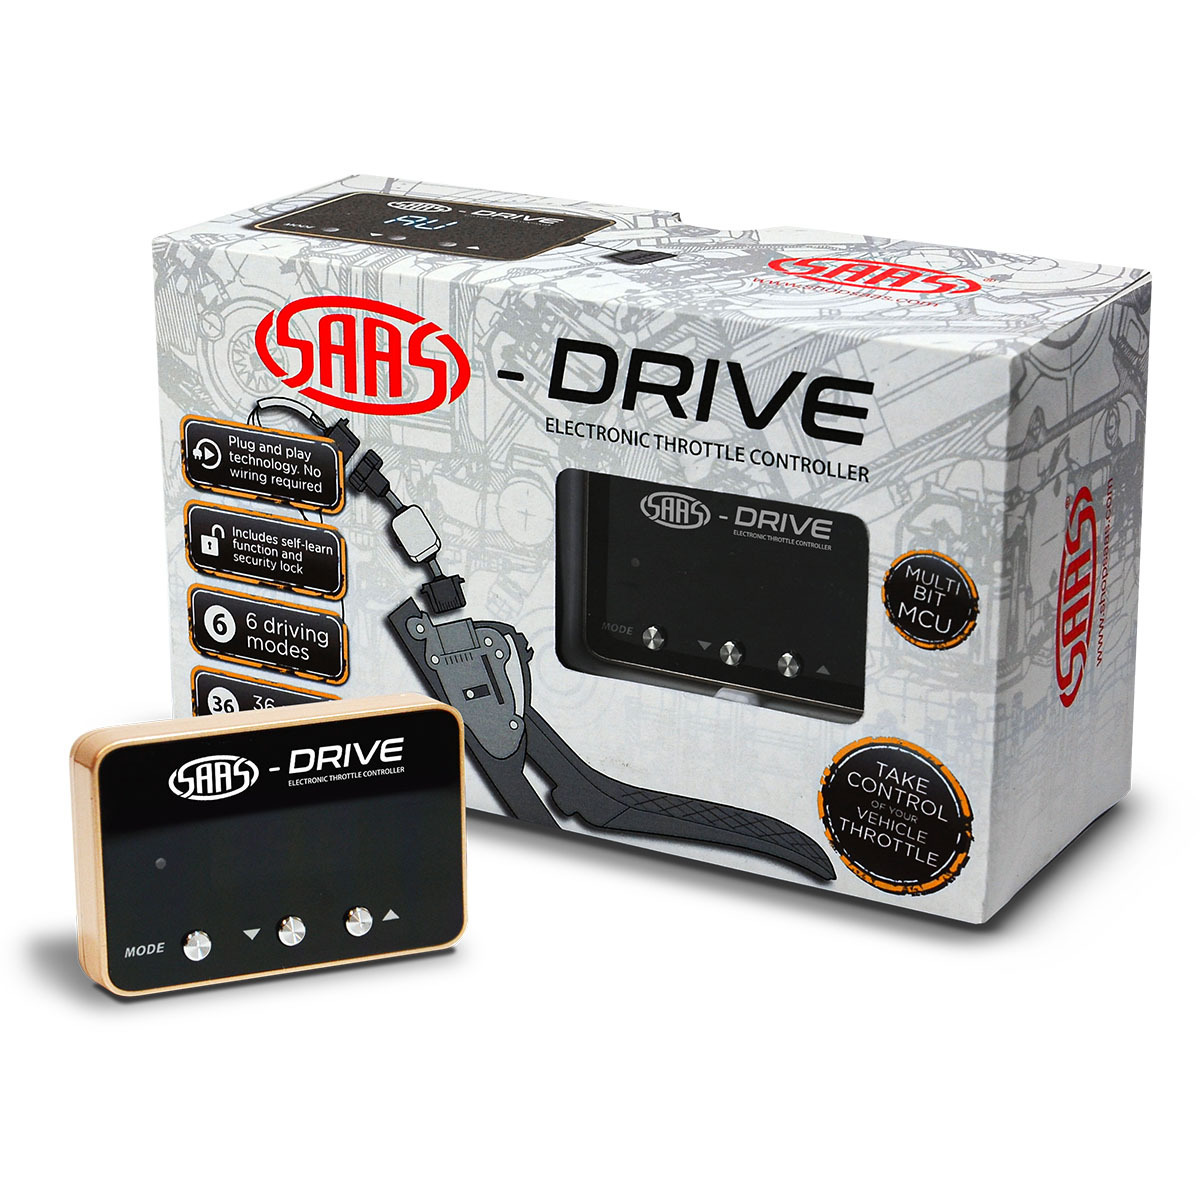 SAAS-Drive Chev Avalanche 2007 - 2013 Throttle Controller